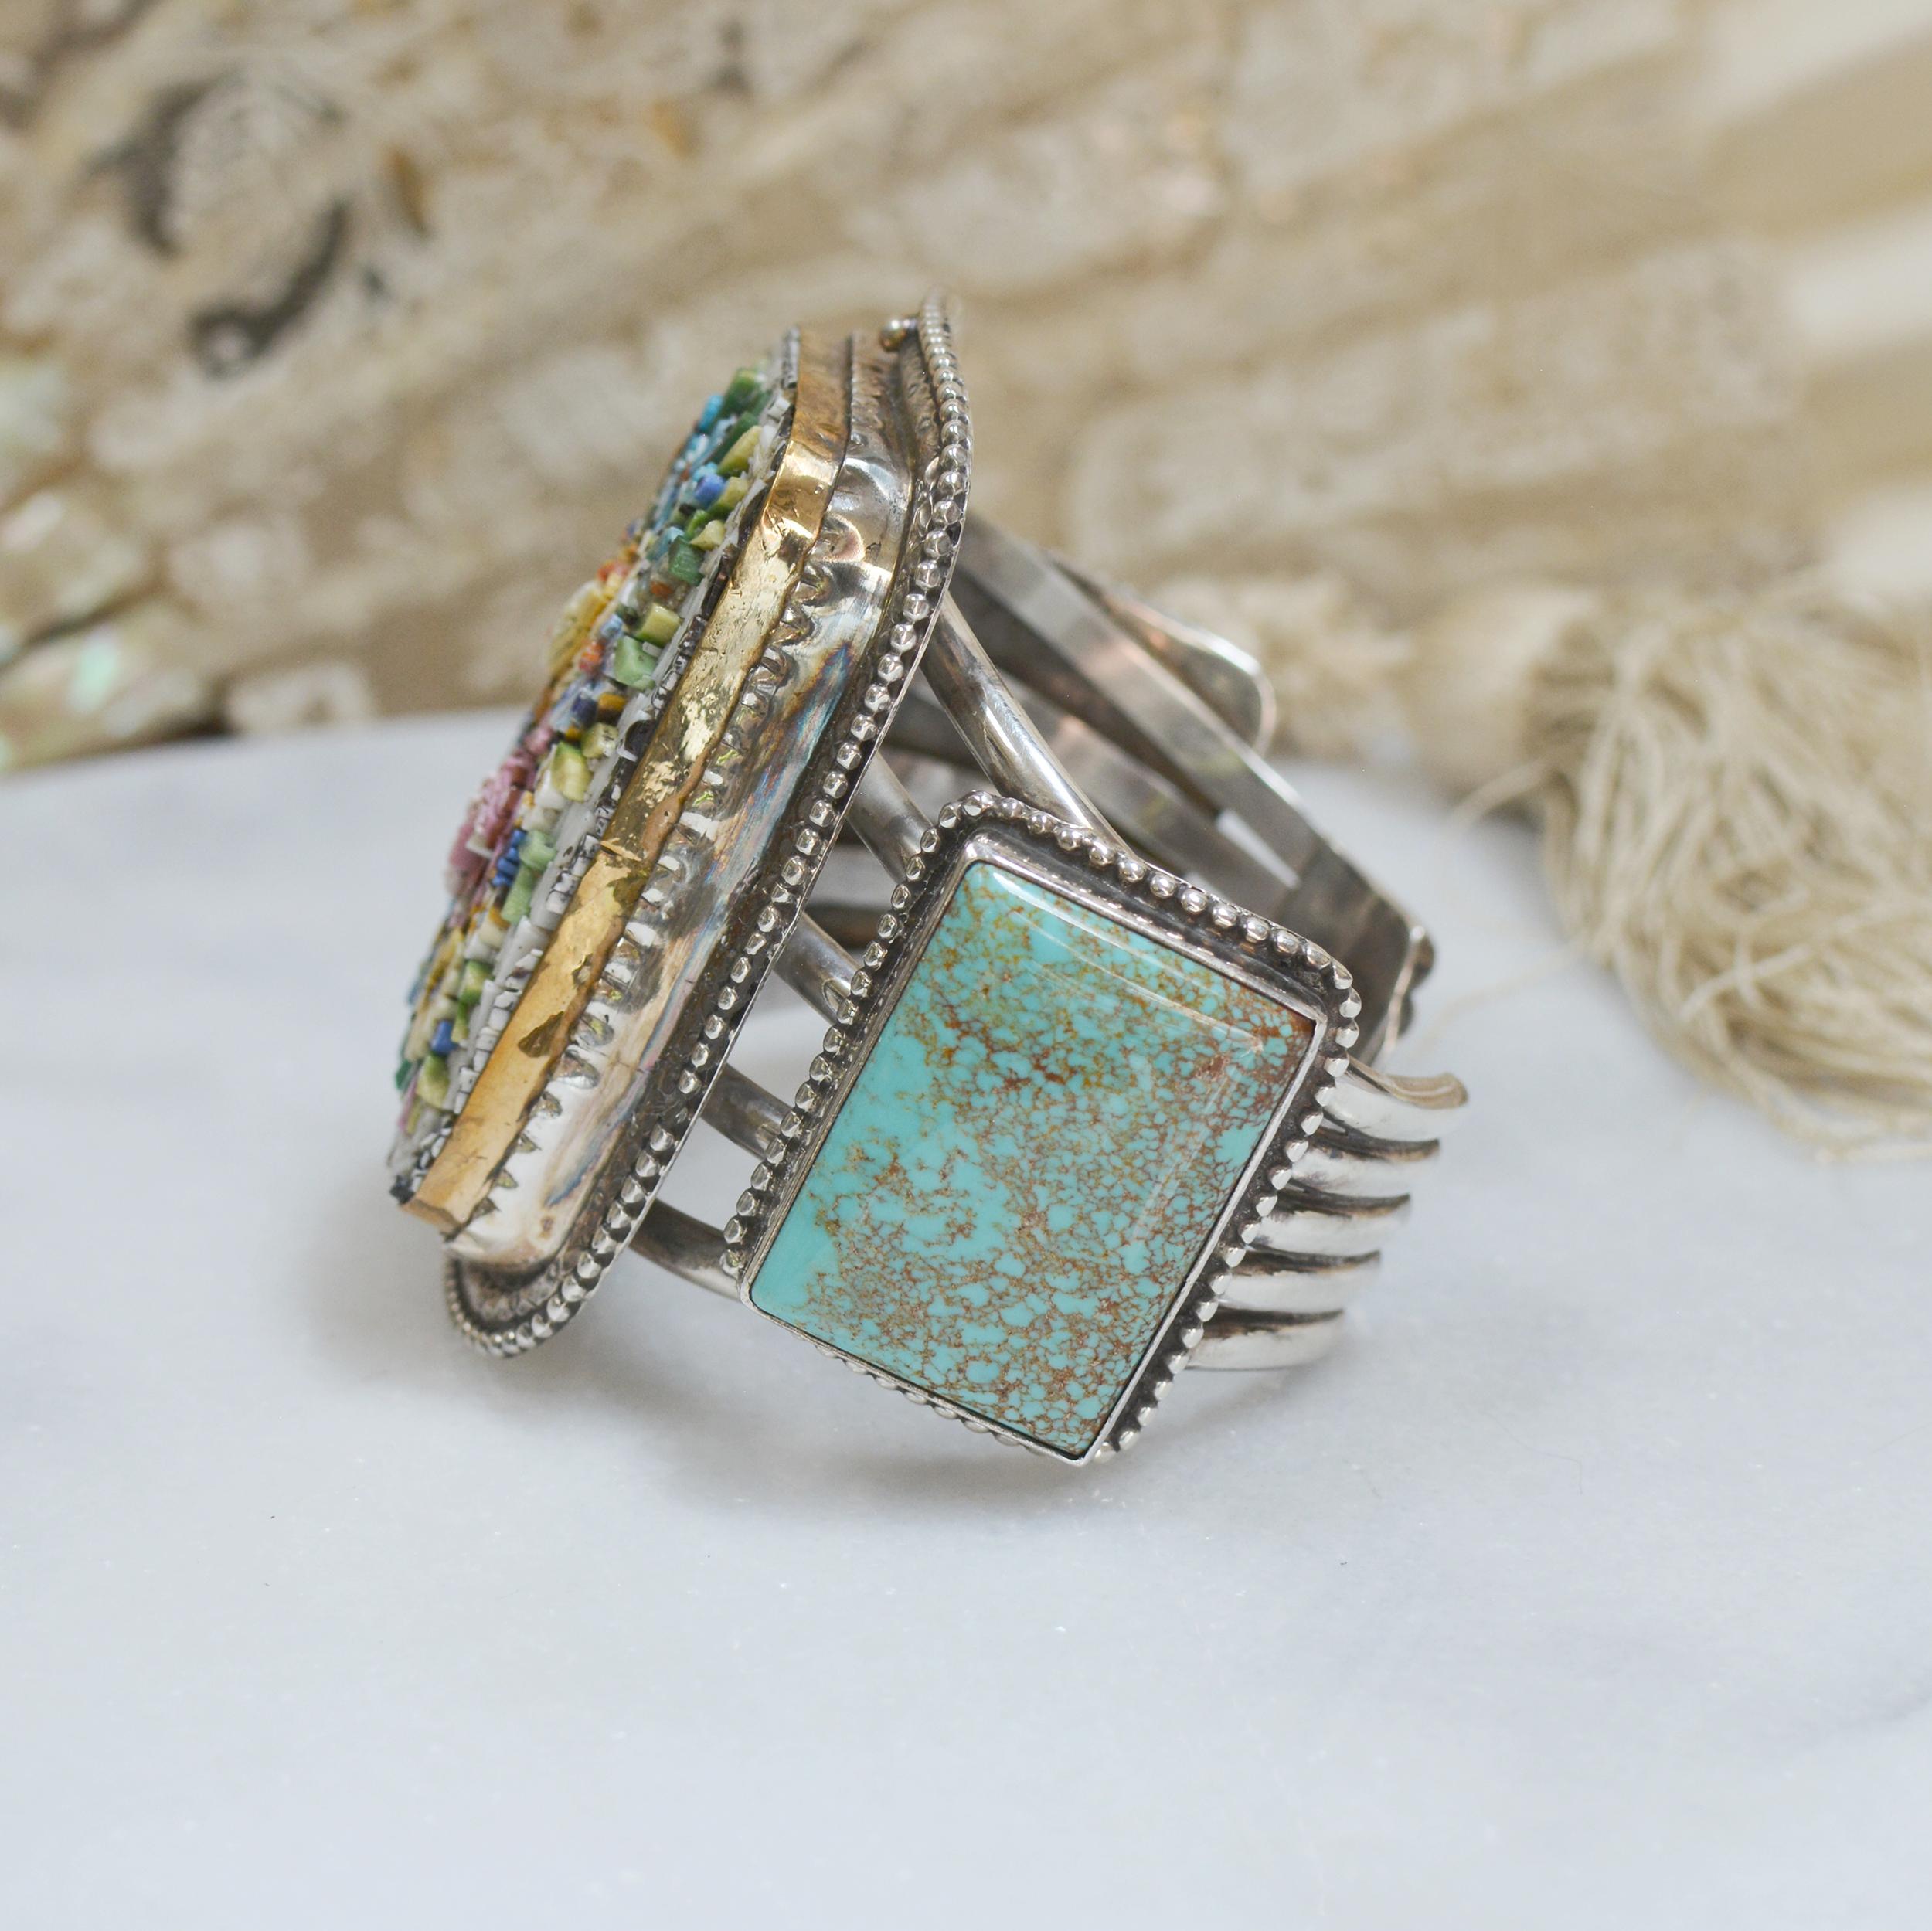 Cabochon Jill Garber Floral Grand Tour Venetian Micro Mosaic and Turquoise Cuff Bracelet